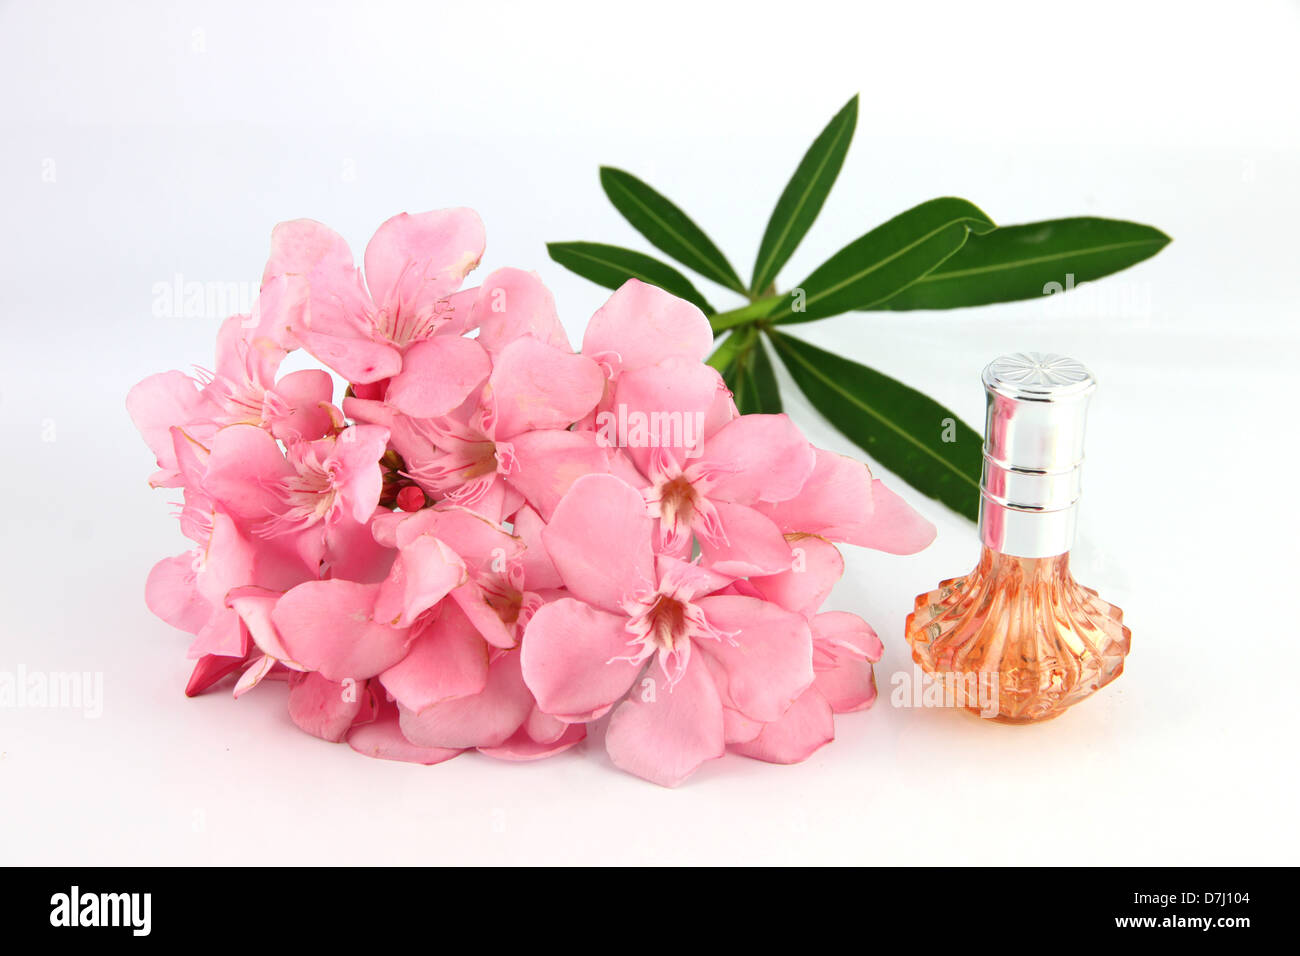 Bouquet of light pink flowers and orange Perfume bottles on the white background. Stock Photo